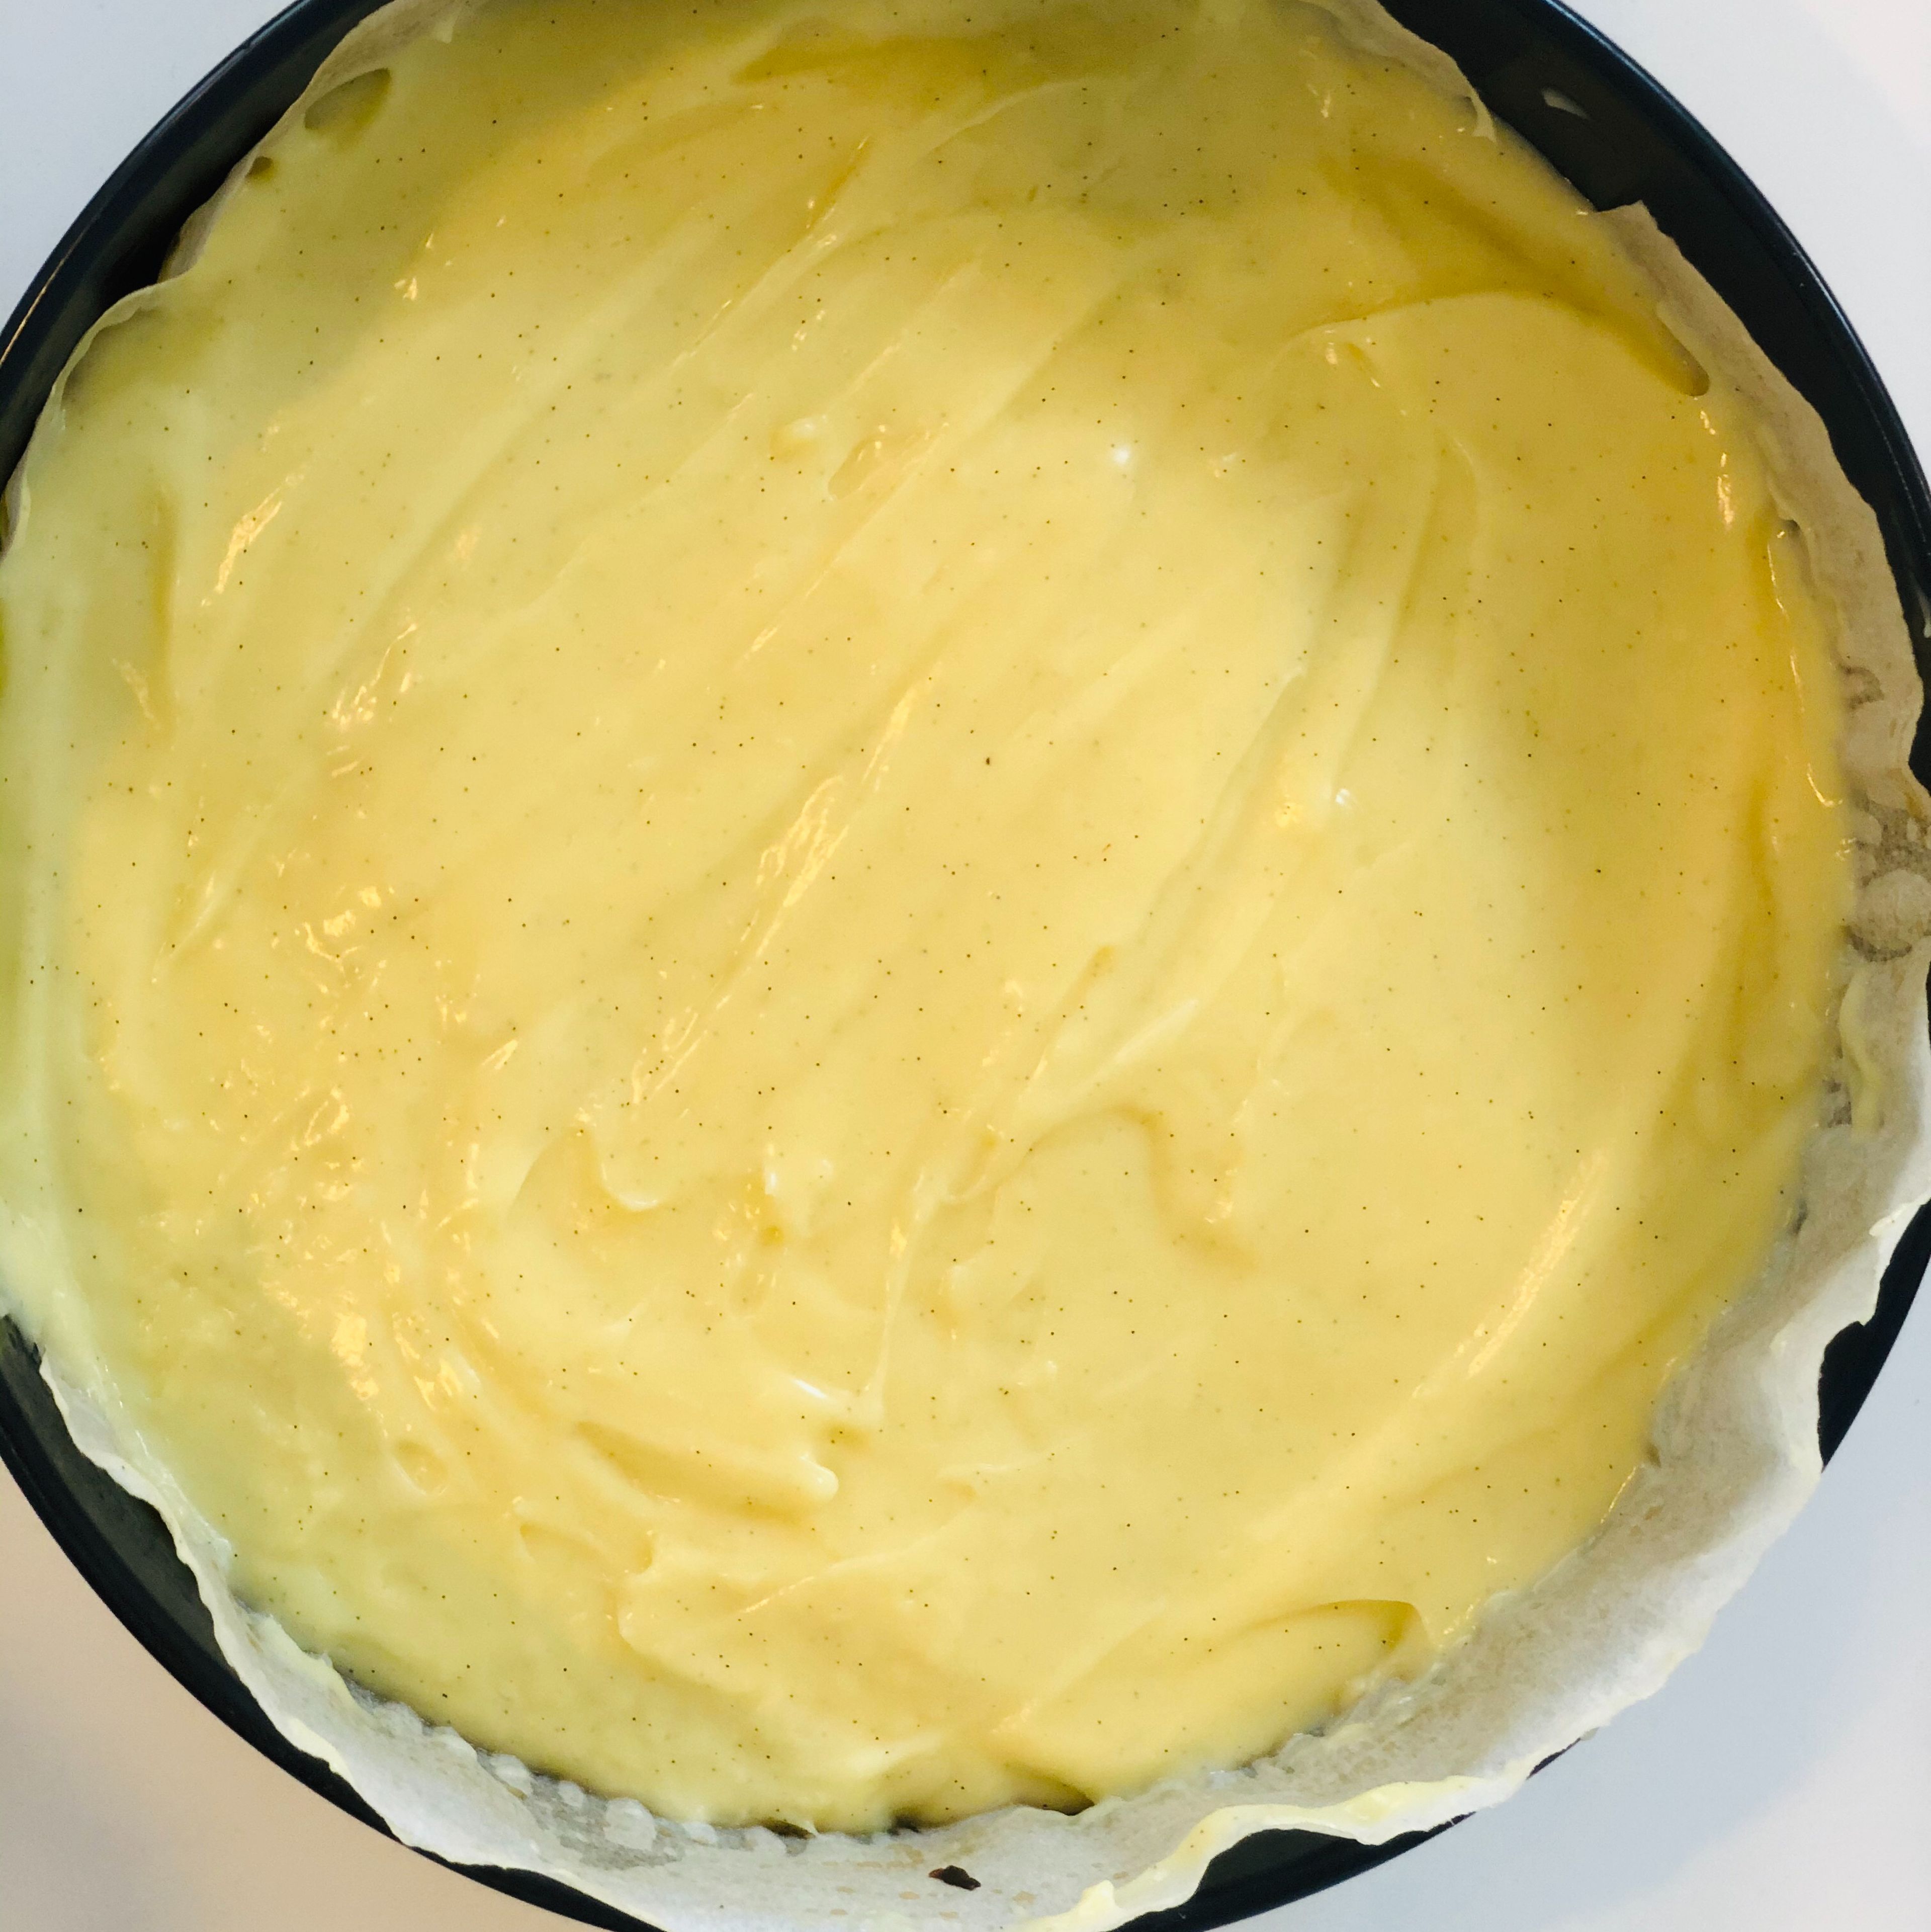 In the springform pan, pour the pastry cream over the cooled cake, wrapping tightly in plastic wrap. Freeze for 15 minutes.